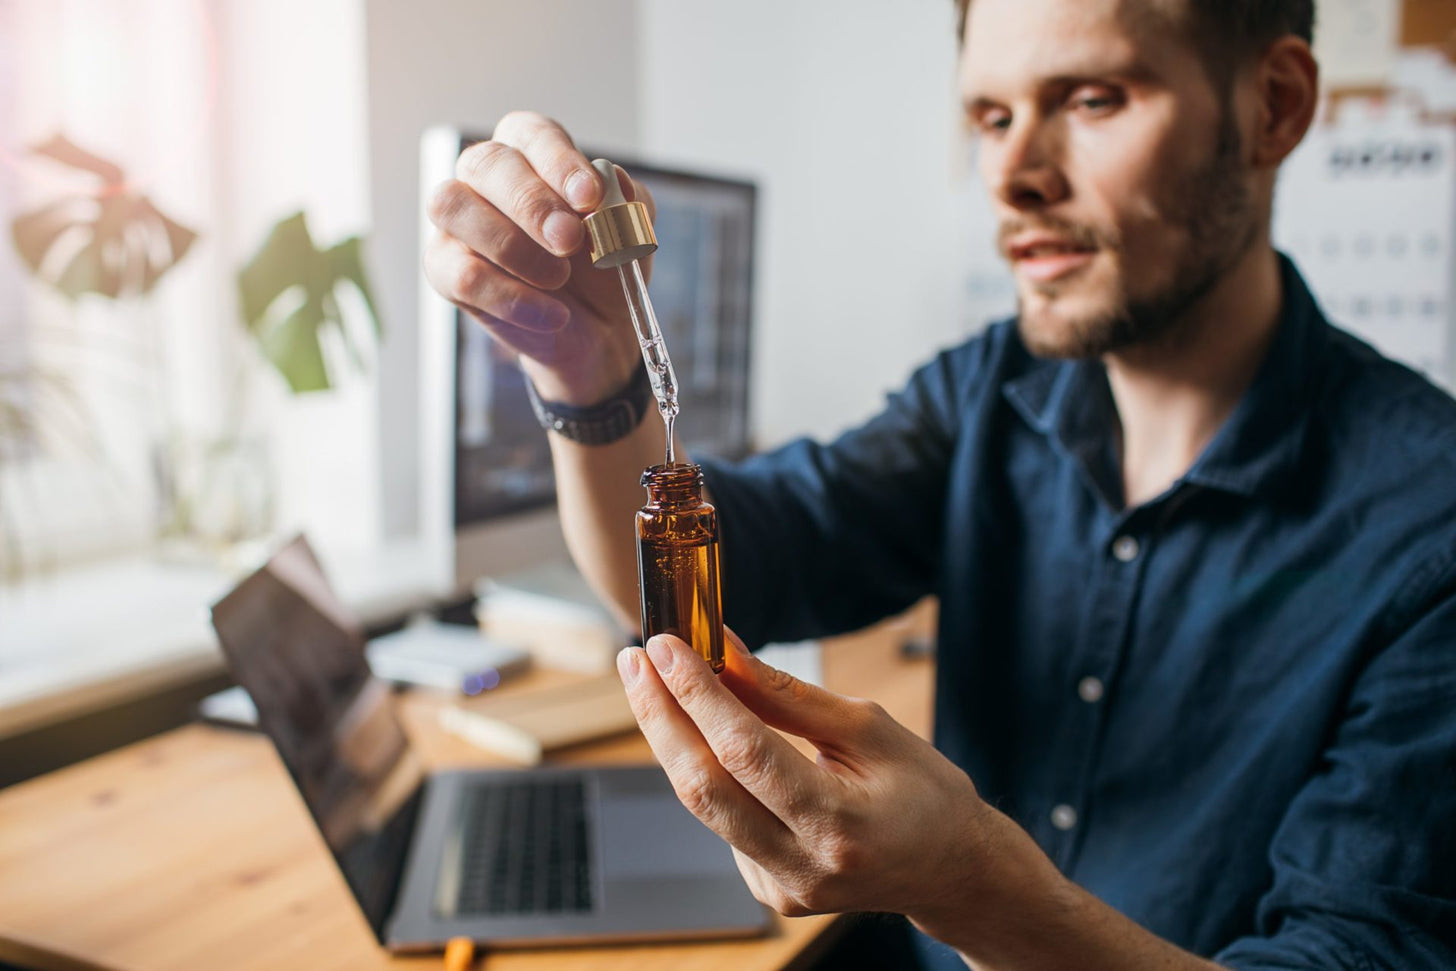 A man holds up a CBD oil dropper and bottle